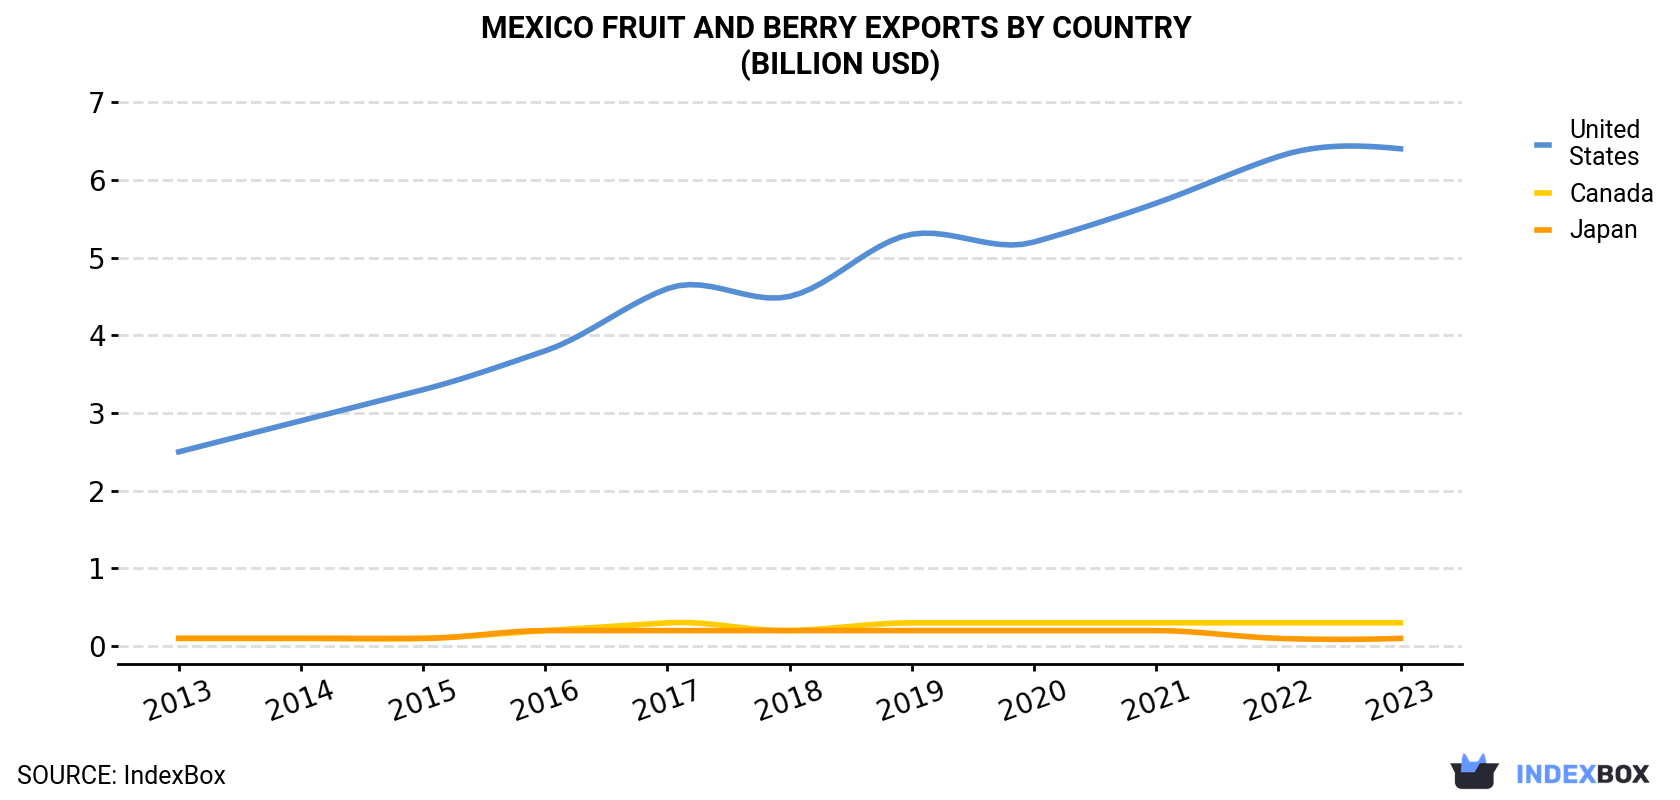 Mexico Fruit and Berry Exports By Country (Billion USD)